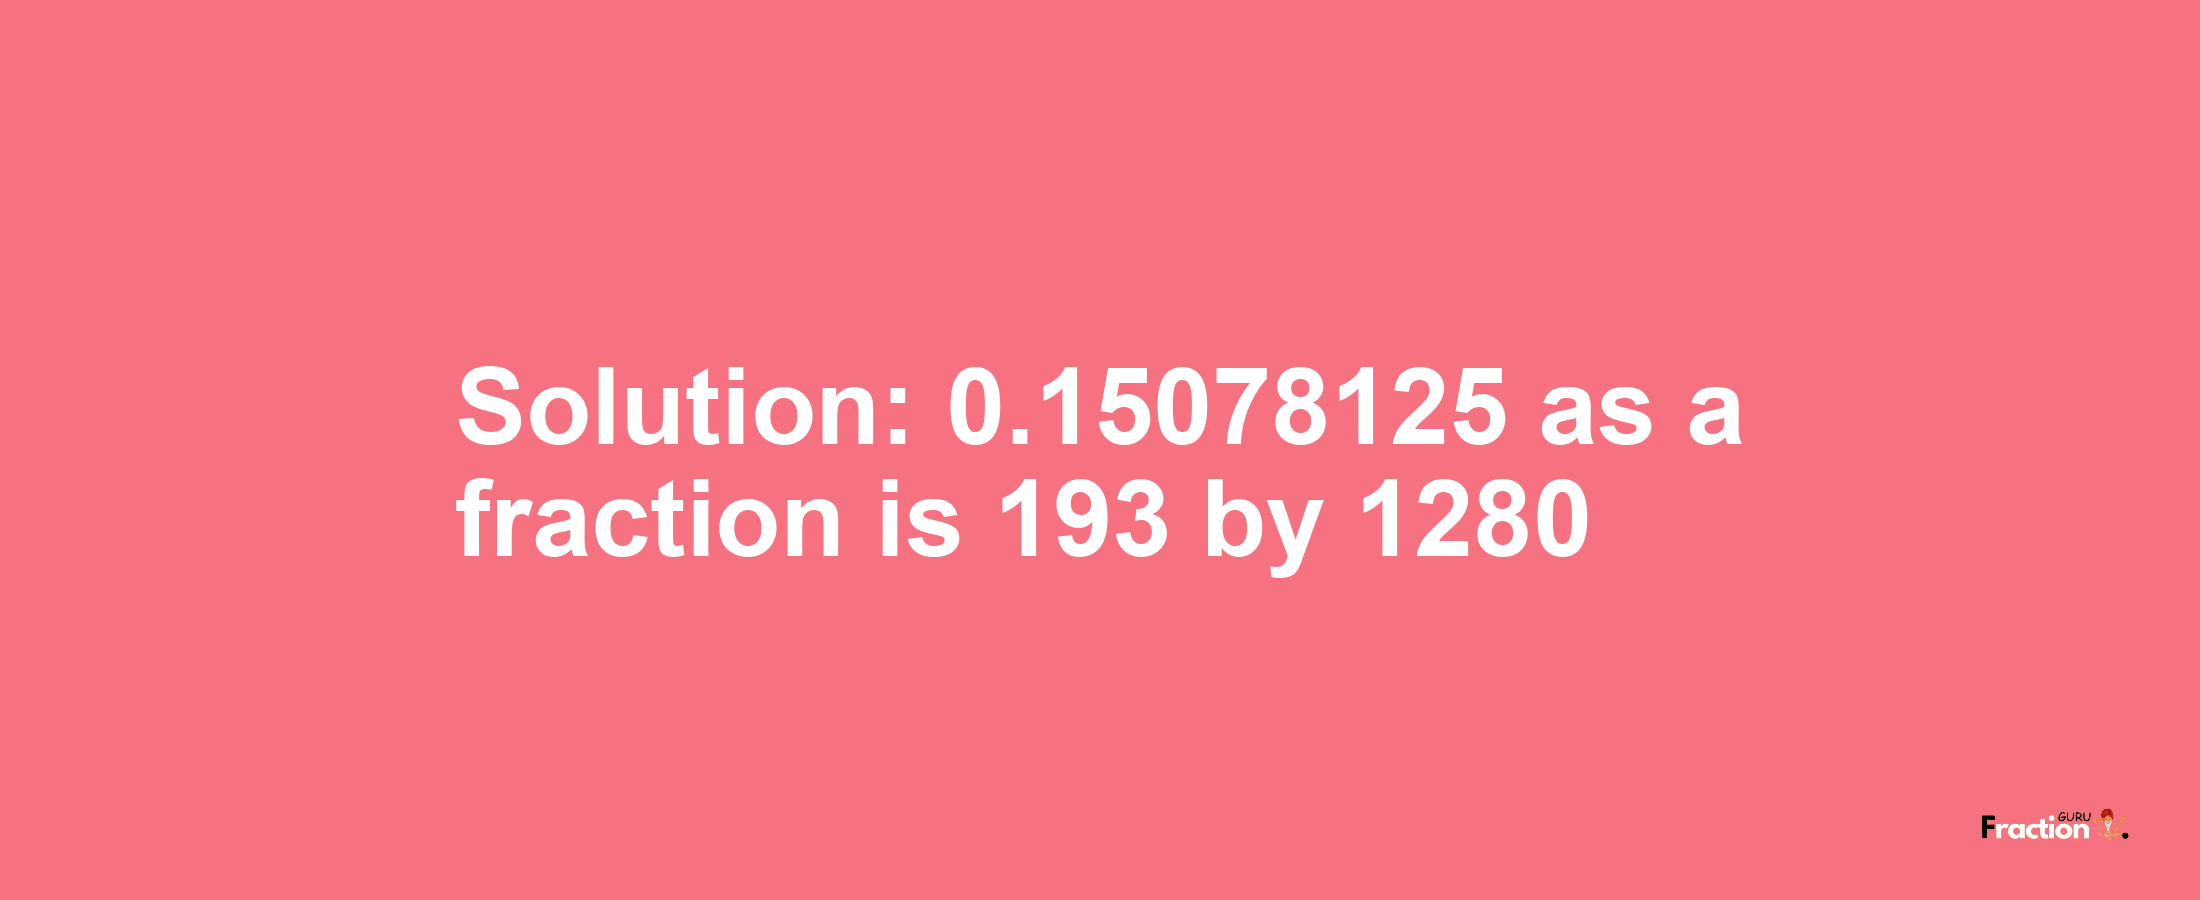 Solution:0.15078125 as a fraction is 193/1280